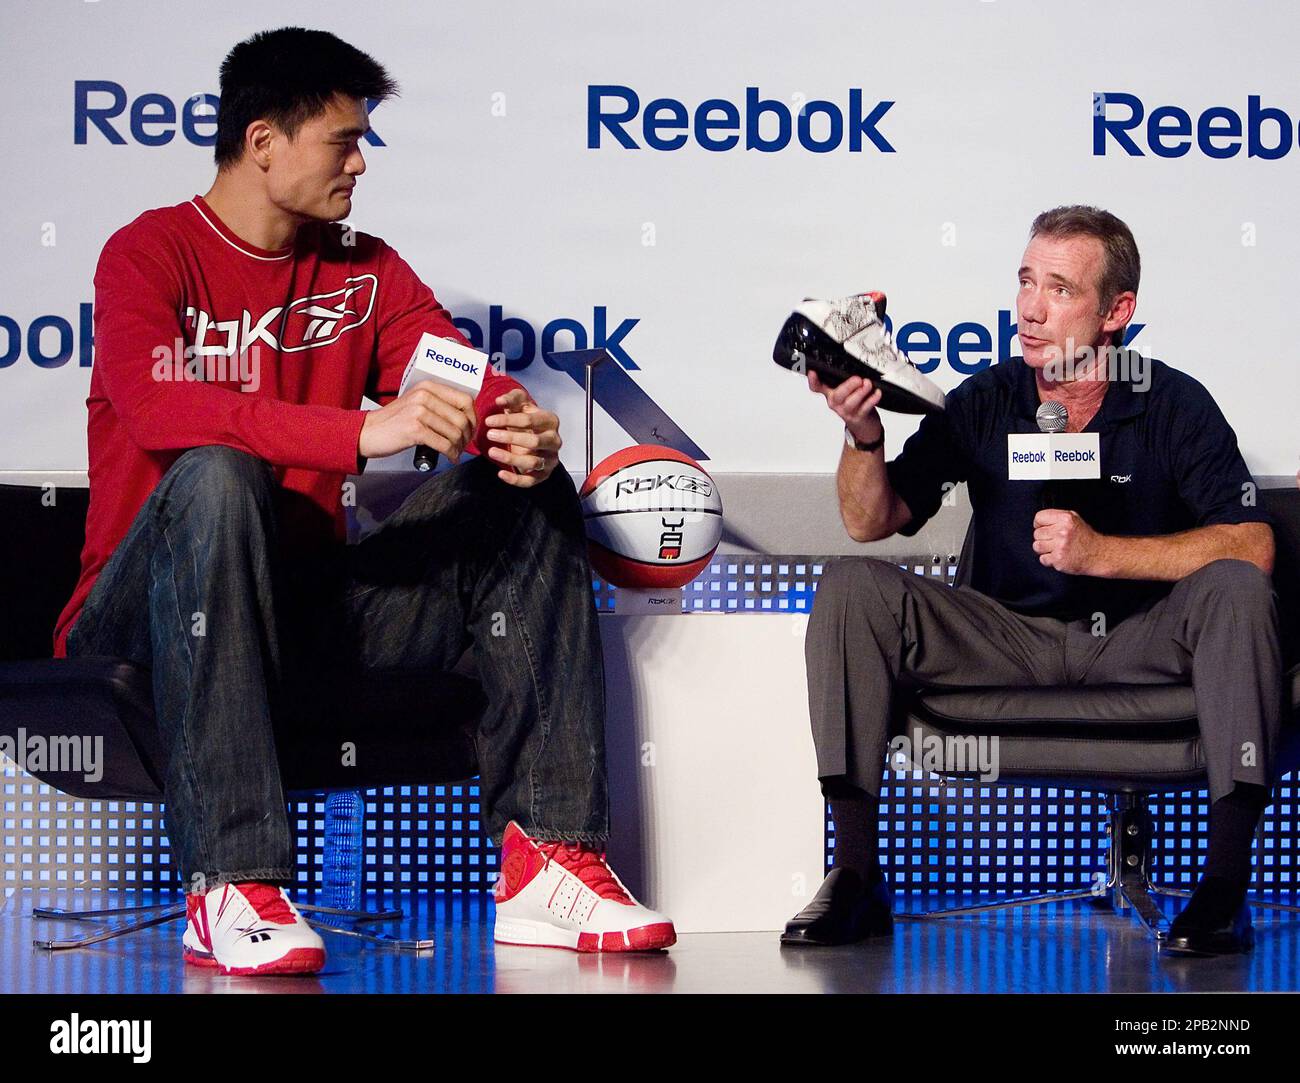 Reebok President and CEO, Paul Harrington, right, shows its latest  basketball shoes model while NBA Houston Rockets' star Yao Ming looks on  during a news conference in Beijing, China, Tuesday, Sept. 25,